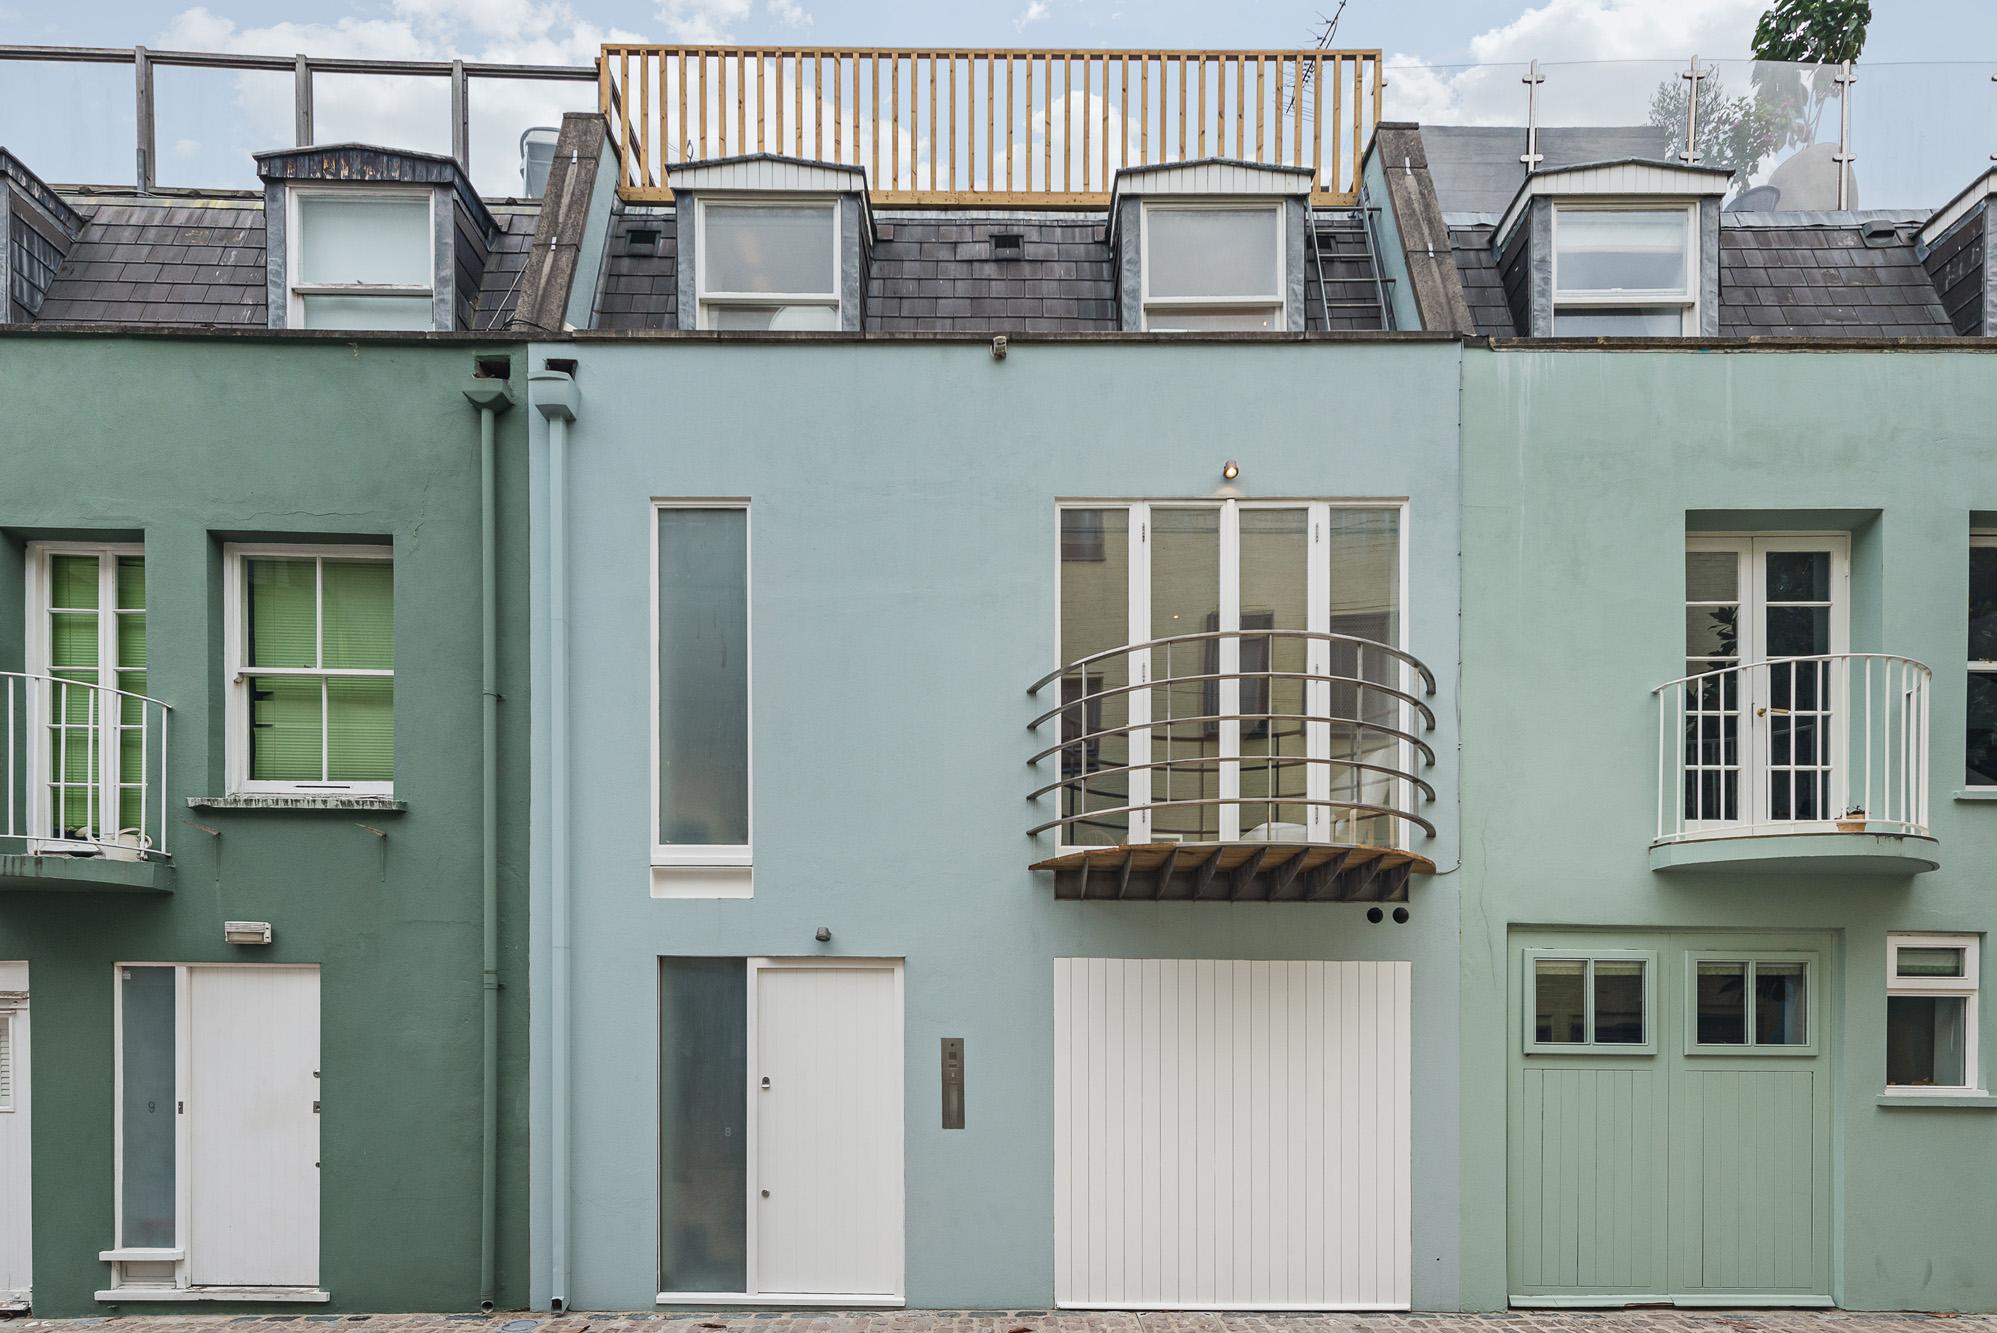 Alba Place Notting Hill W11 pale blue facade